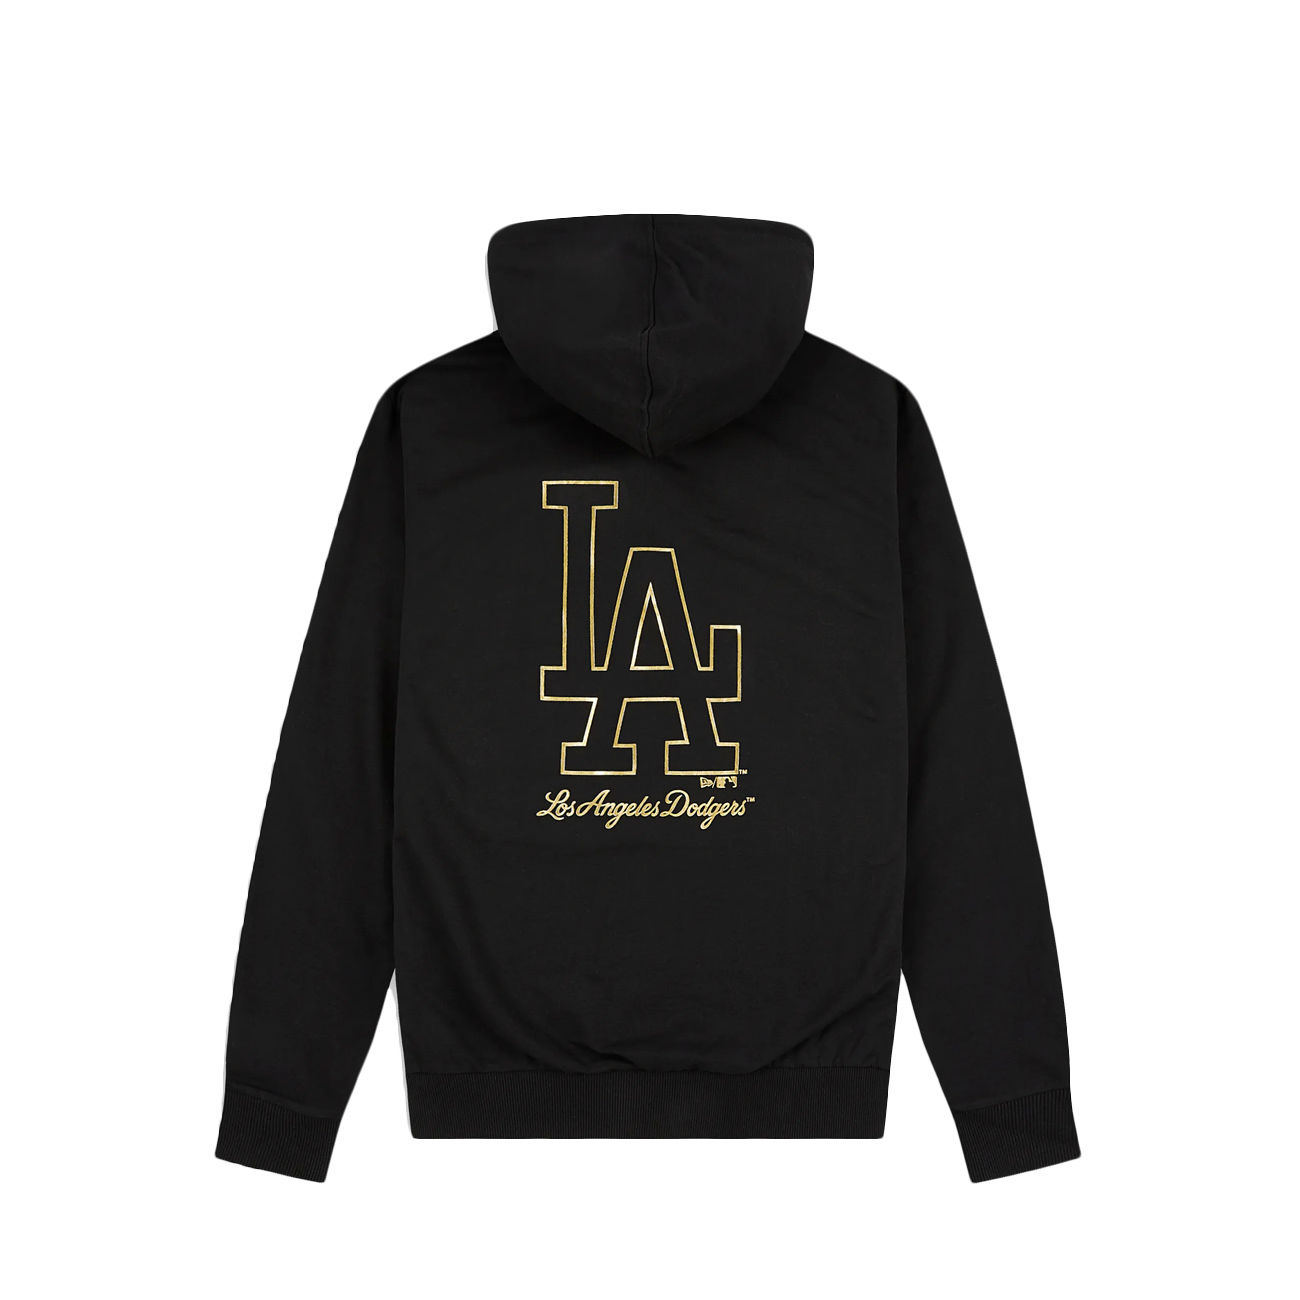 Los Angeles Dodgers Gold Tone Knit